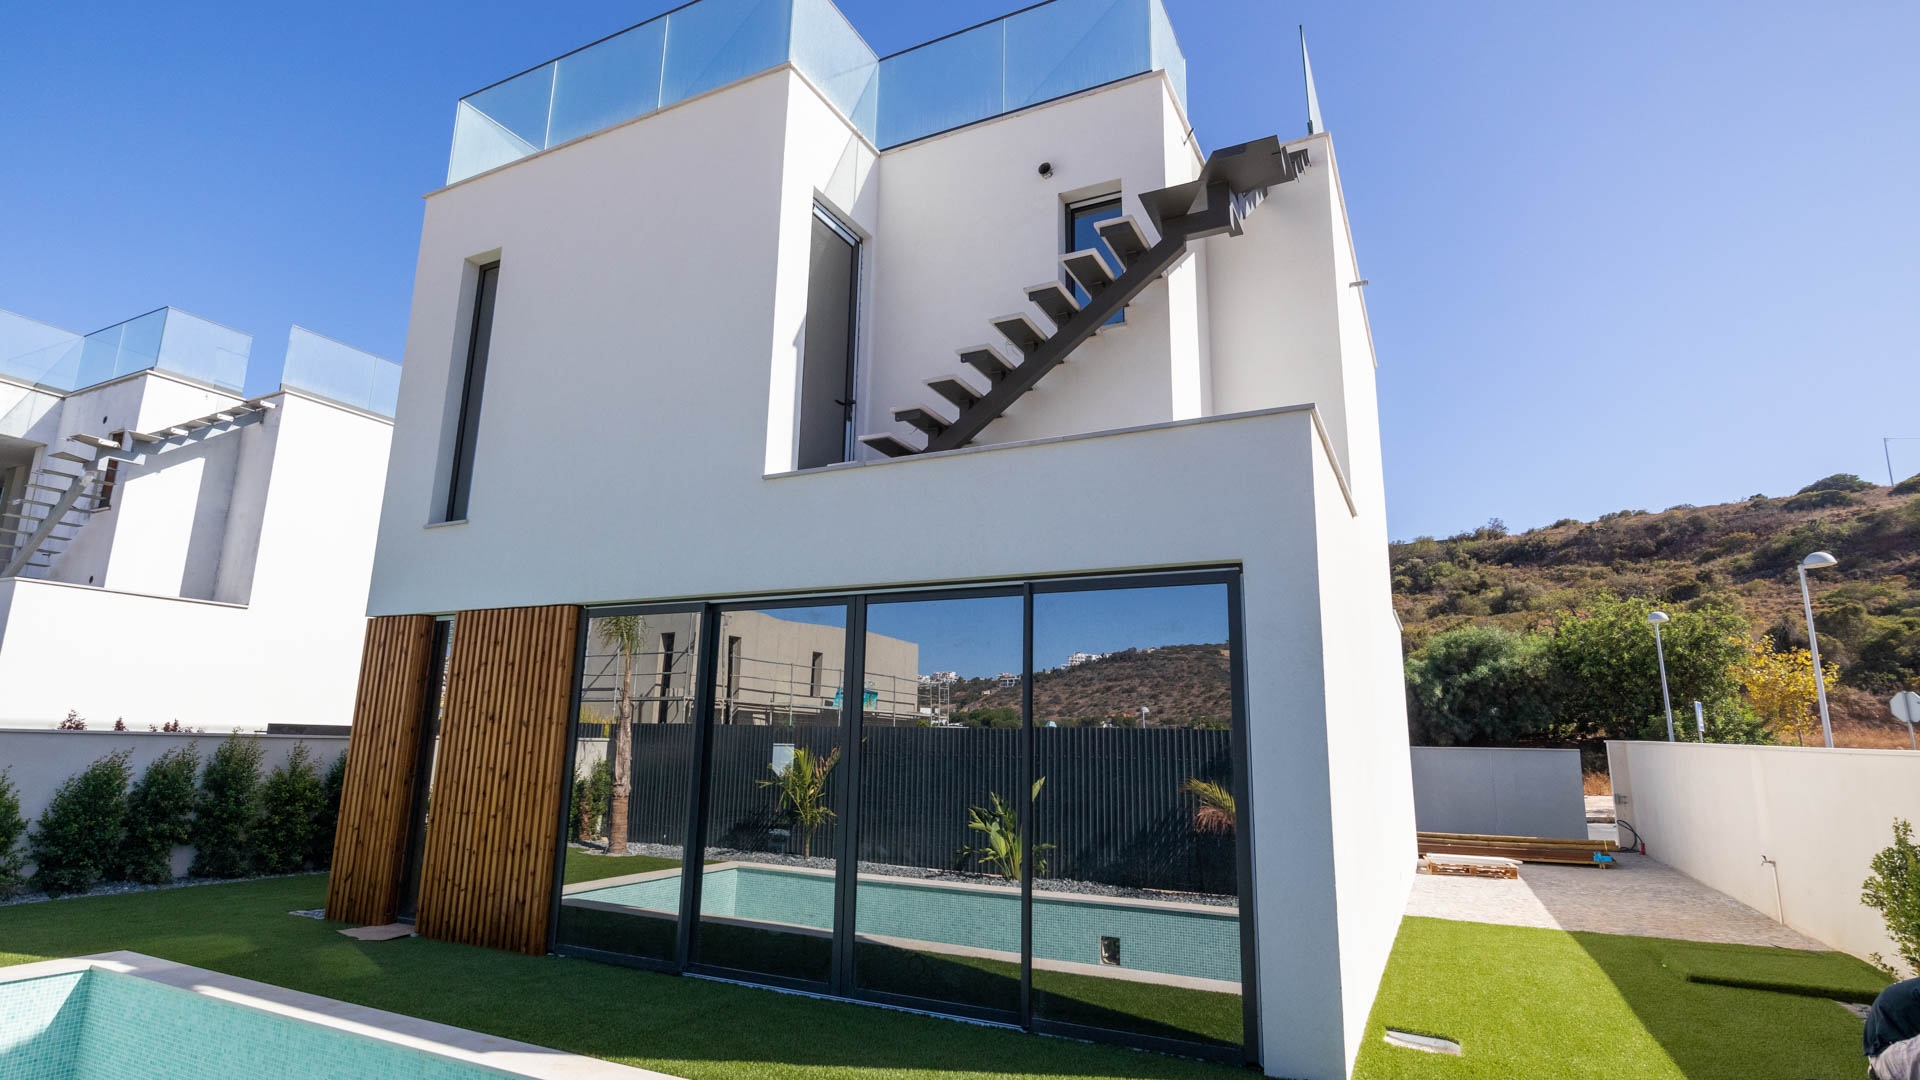 Contemporary 3 Bedroom Villas with Rooftop Deck and Marina Views, Albufeira | VM1895 Brand new homes walking distance to all amenities. High specification finishes including under floor heating and external insulation. Open plan living areas for modern life.